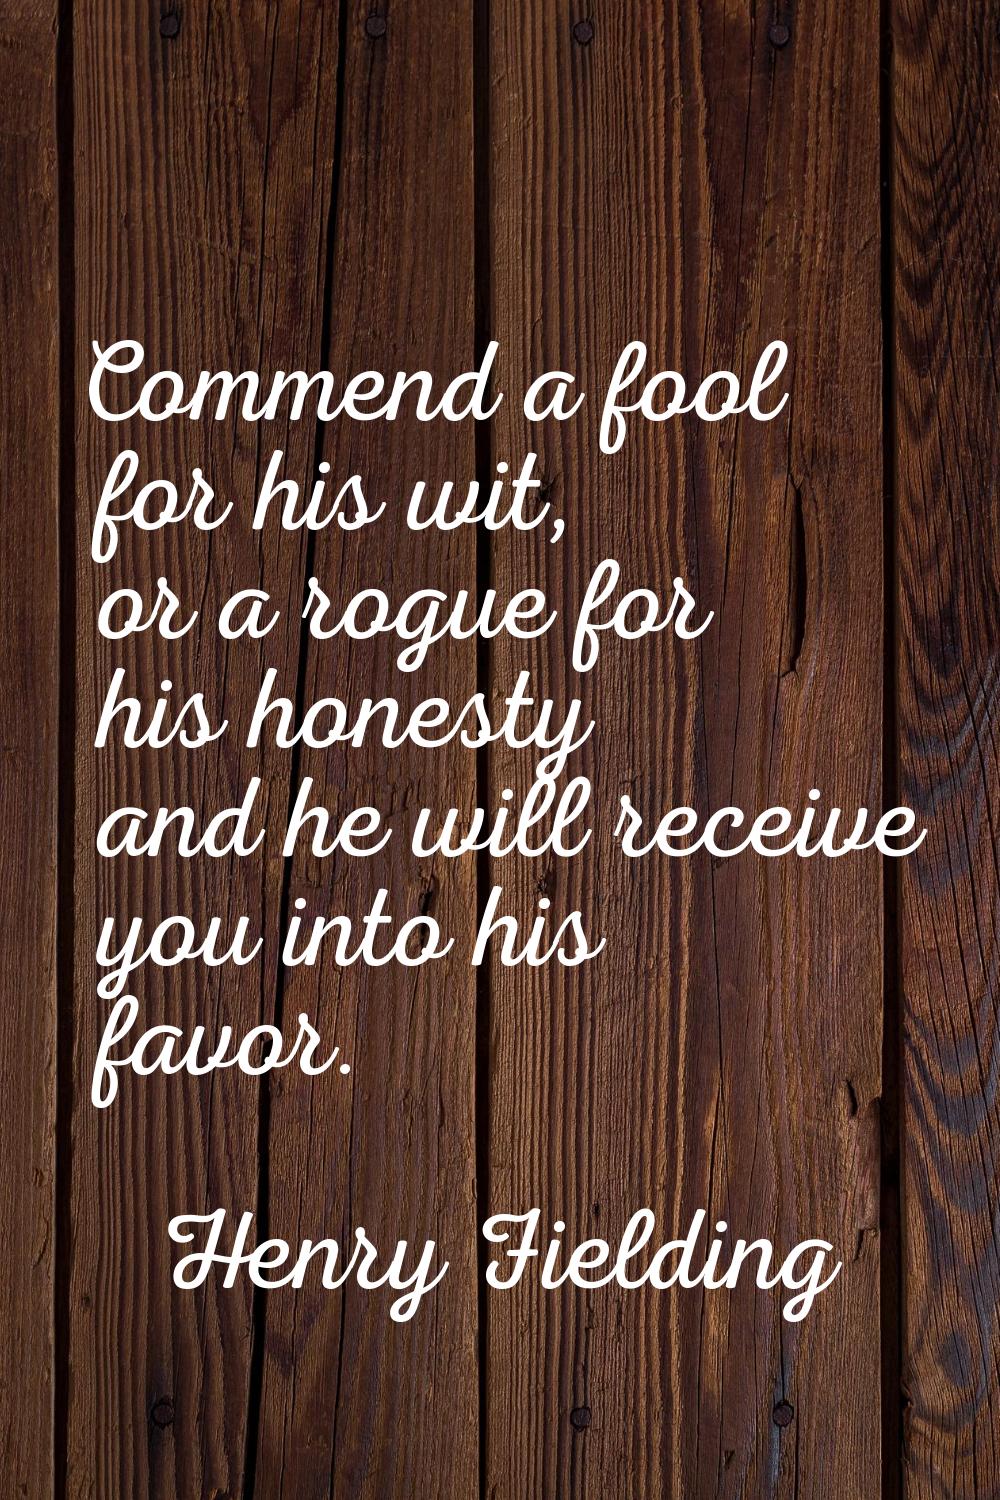 Commend a fool for his wit, or a rogue for his honesty and he will receive you into his favor.